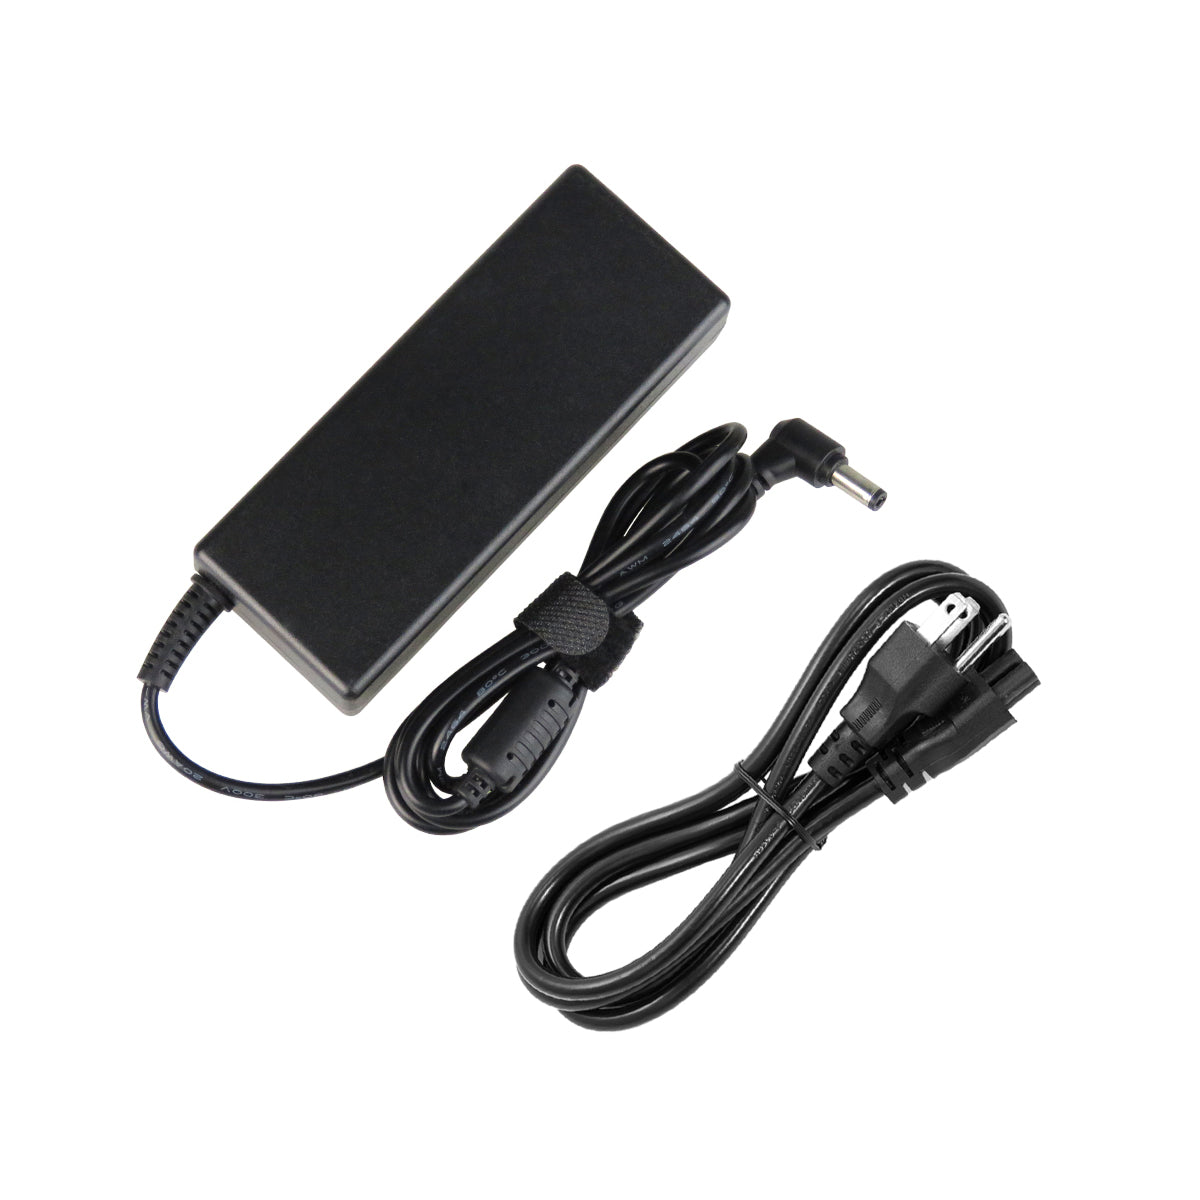 AC Adapter Charger for ASUS K75 Notebook.